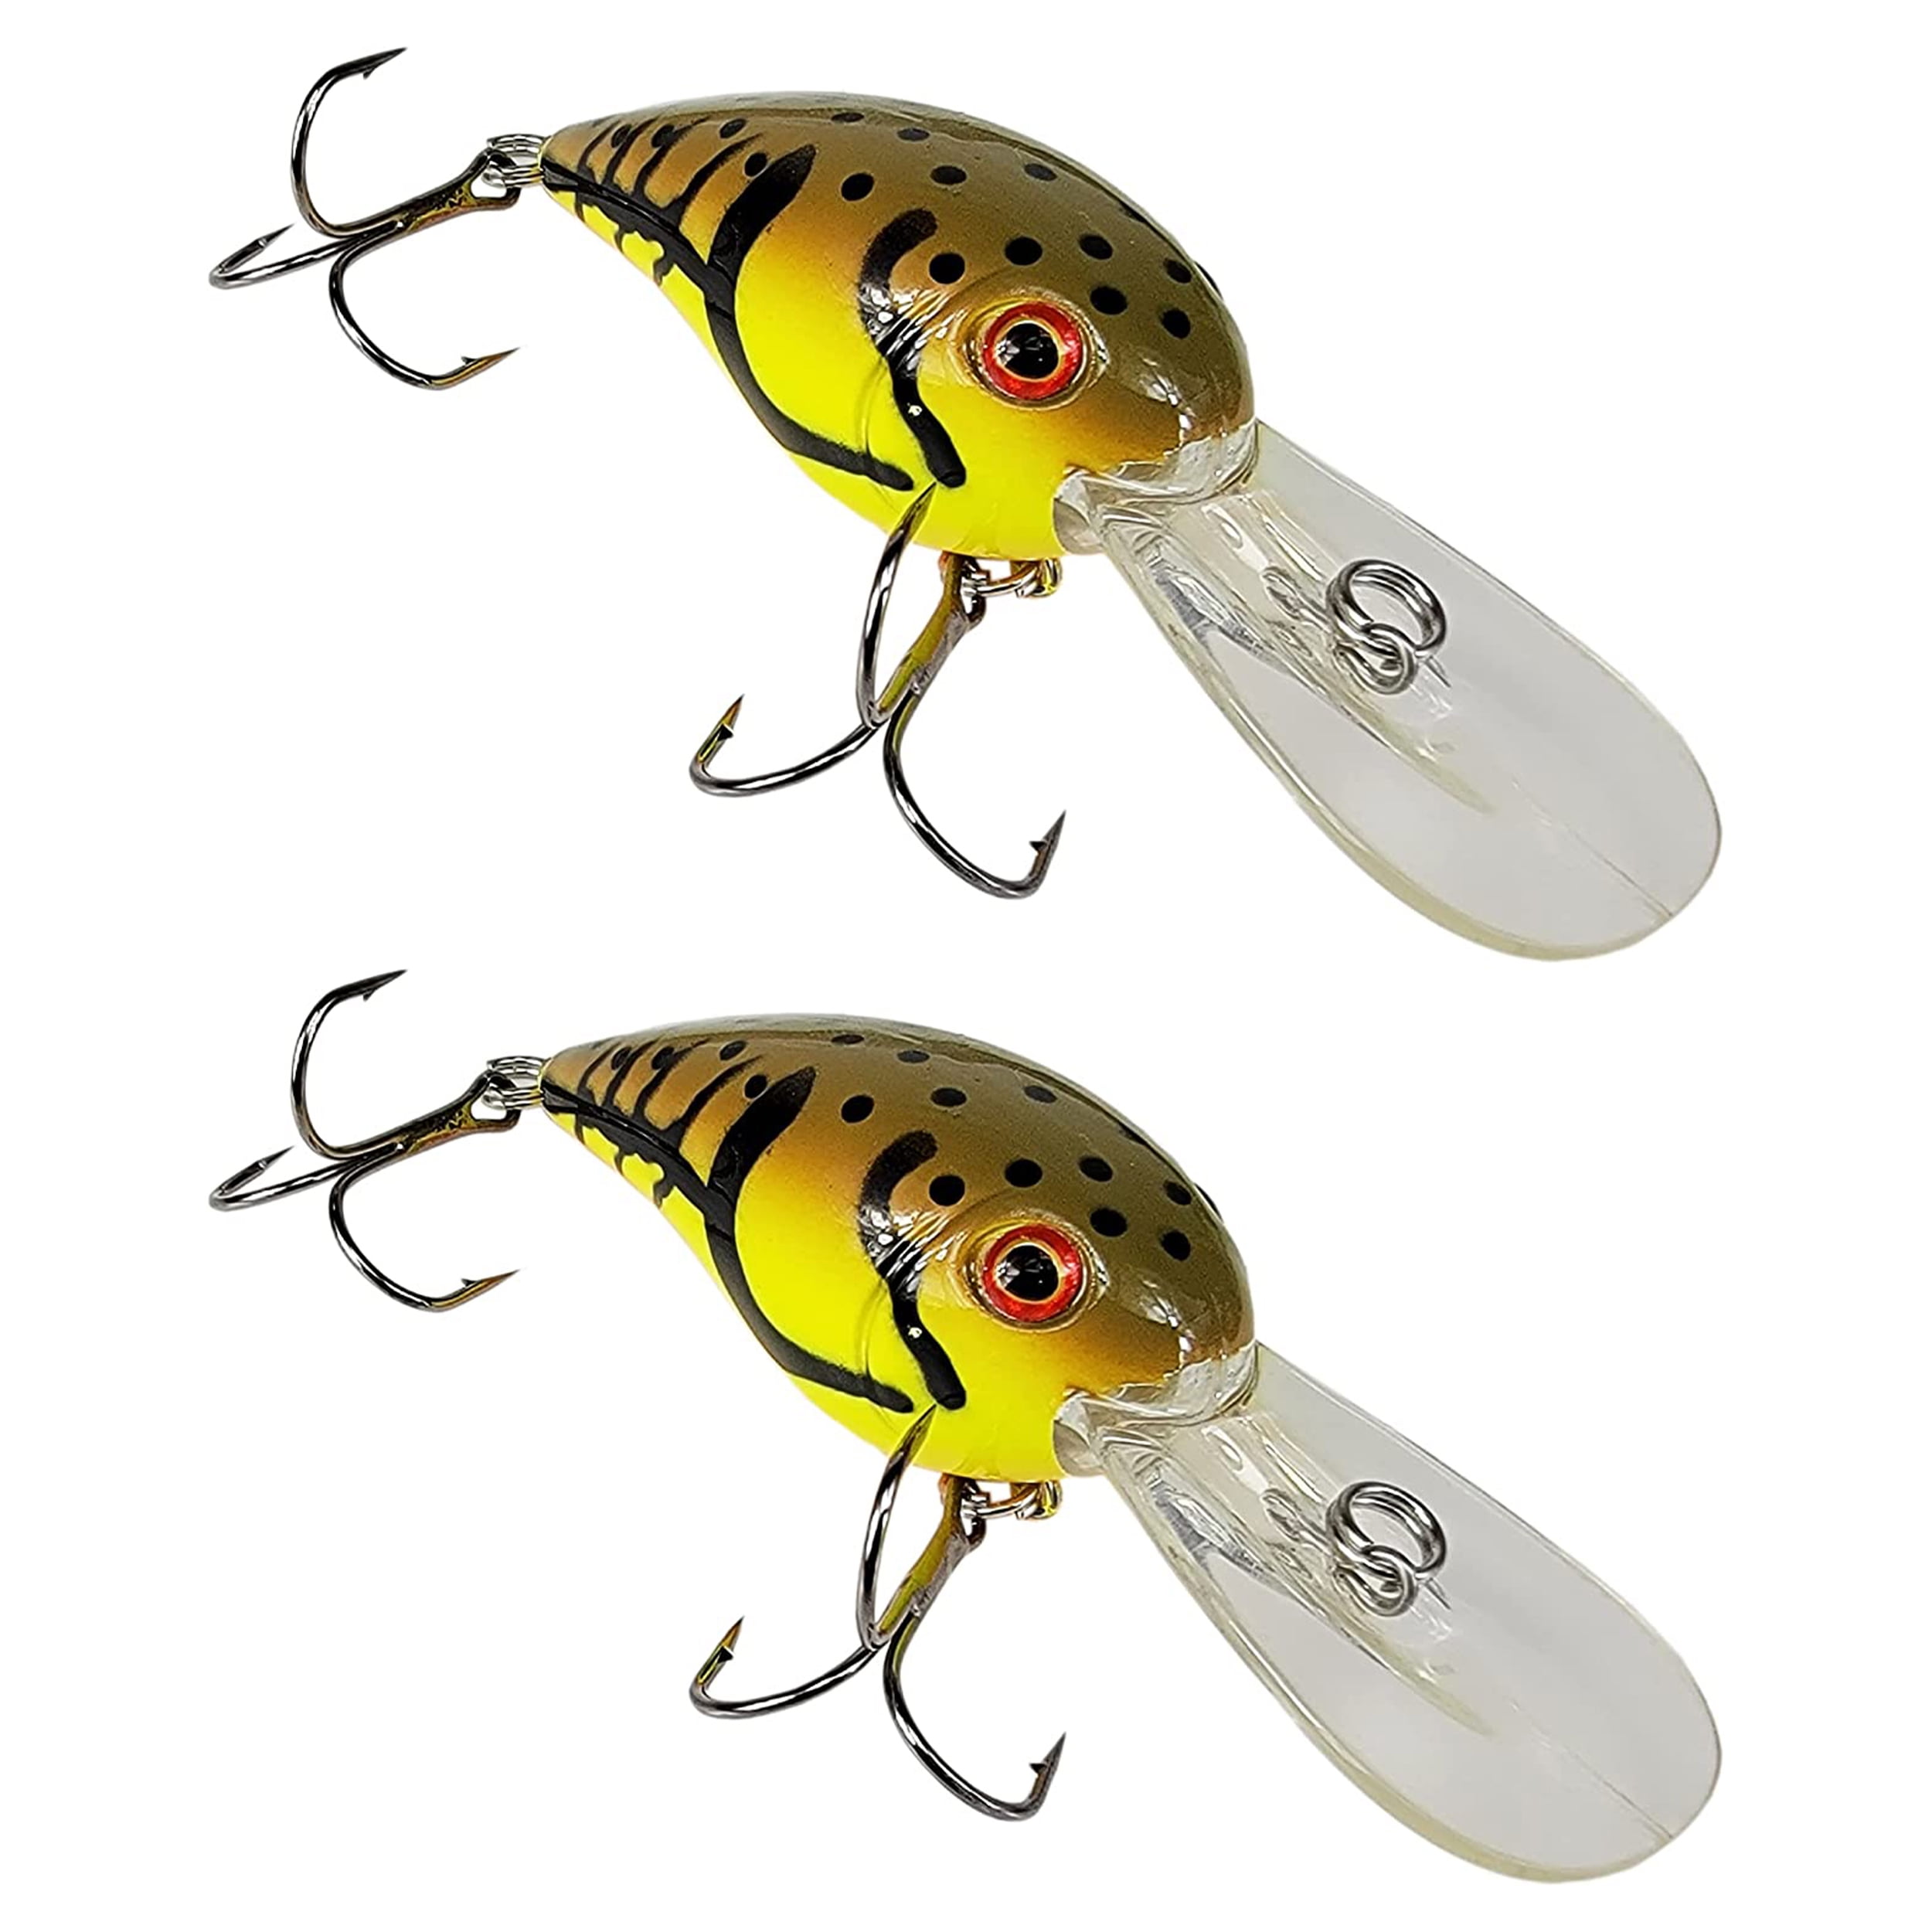 Tackle HD 2-Pack Crankhead Crankbait, Fishing Bait with 9 to 14 Feet Depth,  Fishing Lures for Freshwater or Saltwater, Hard Swimbaits for Bass, Crappie,  or Walleye, Spring Craw 